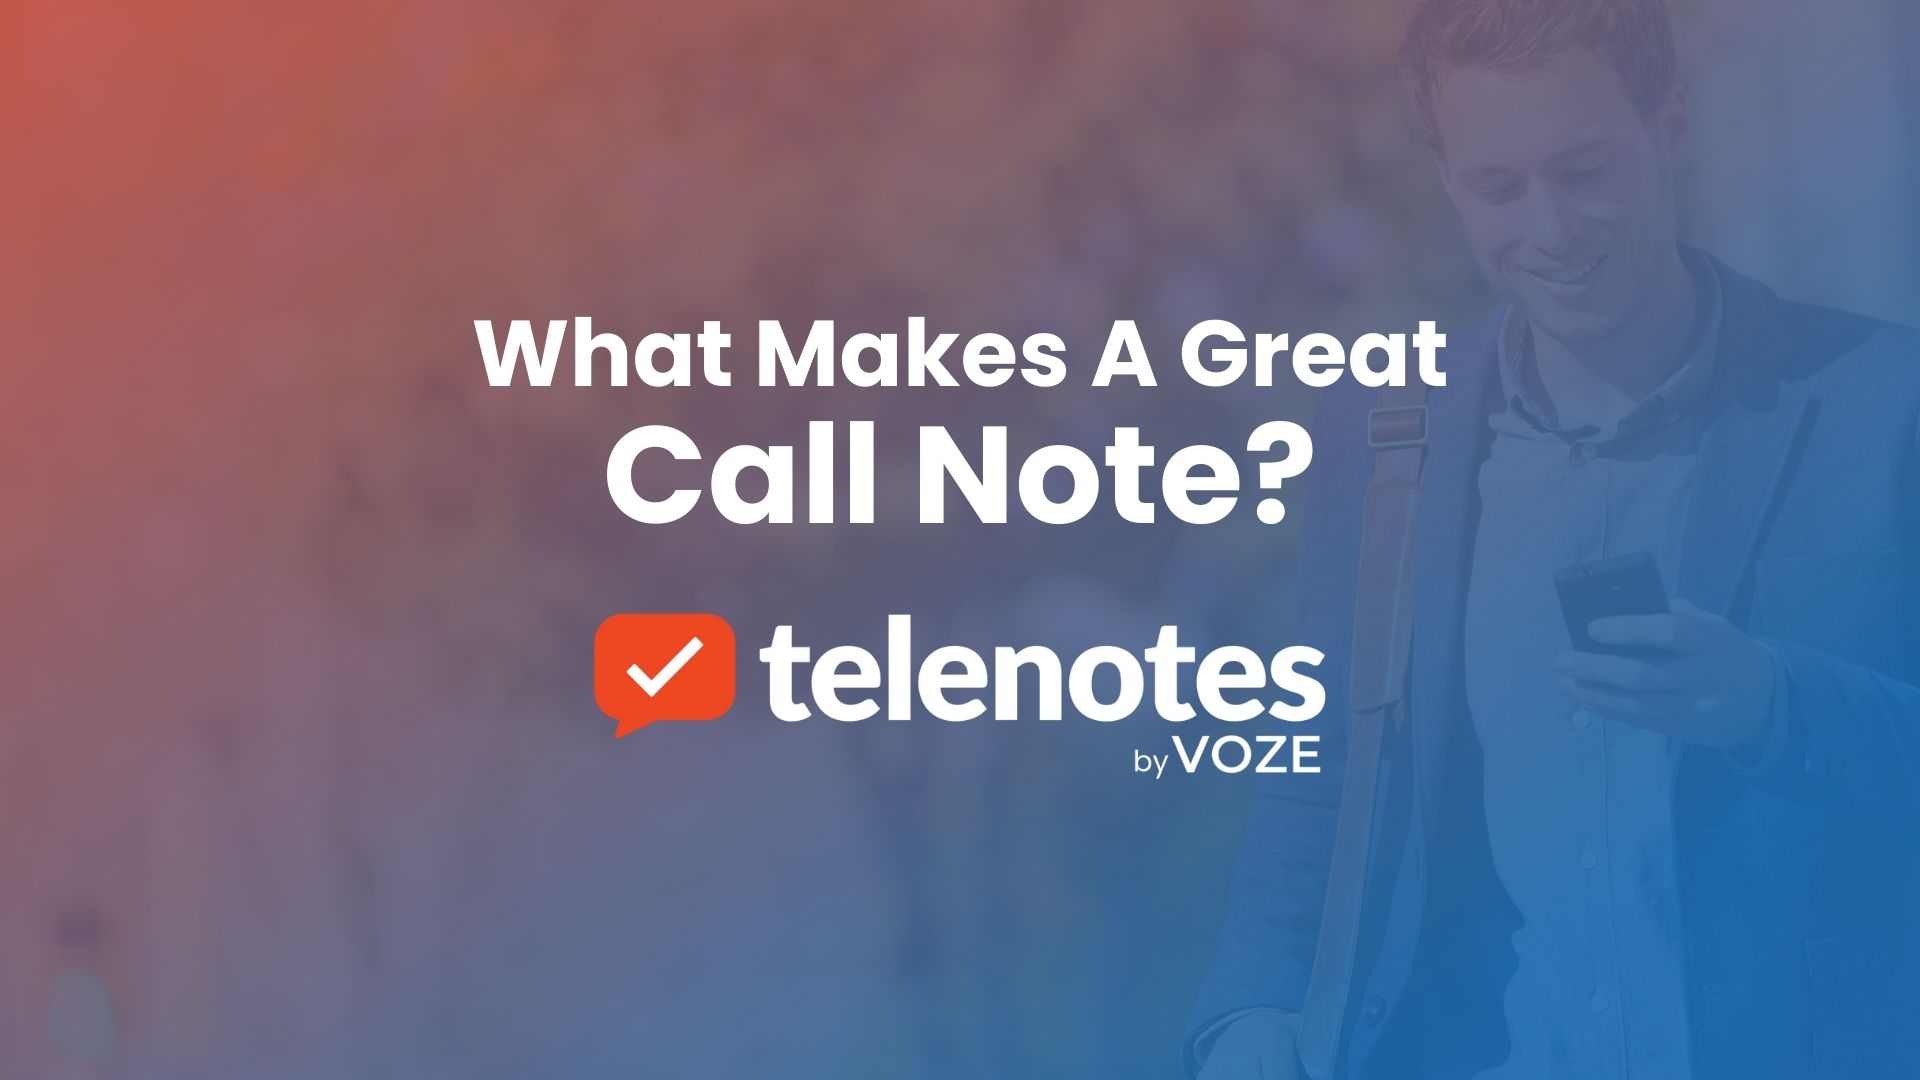 What Makes A Great Call Note? Check Out These Tips From Our Best Customers